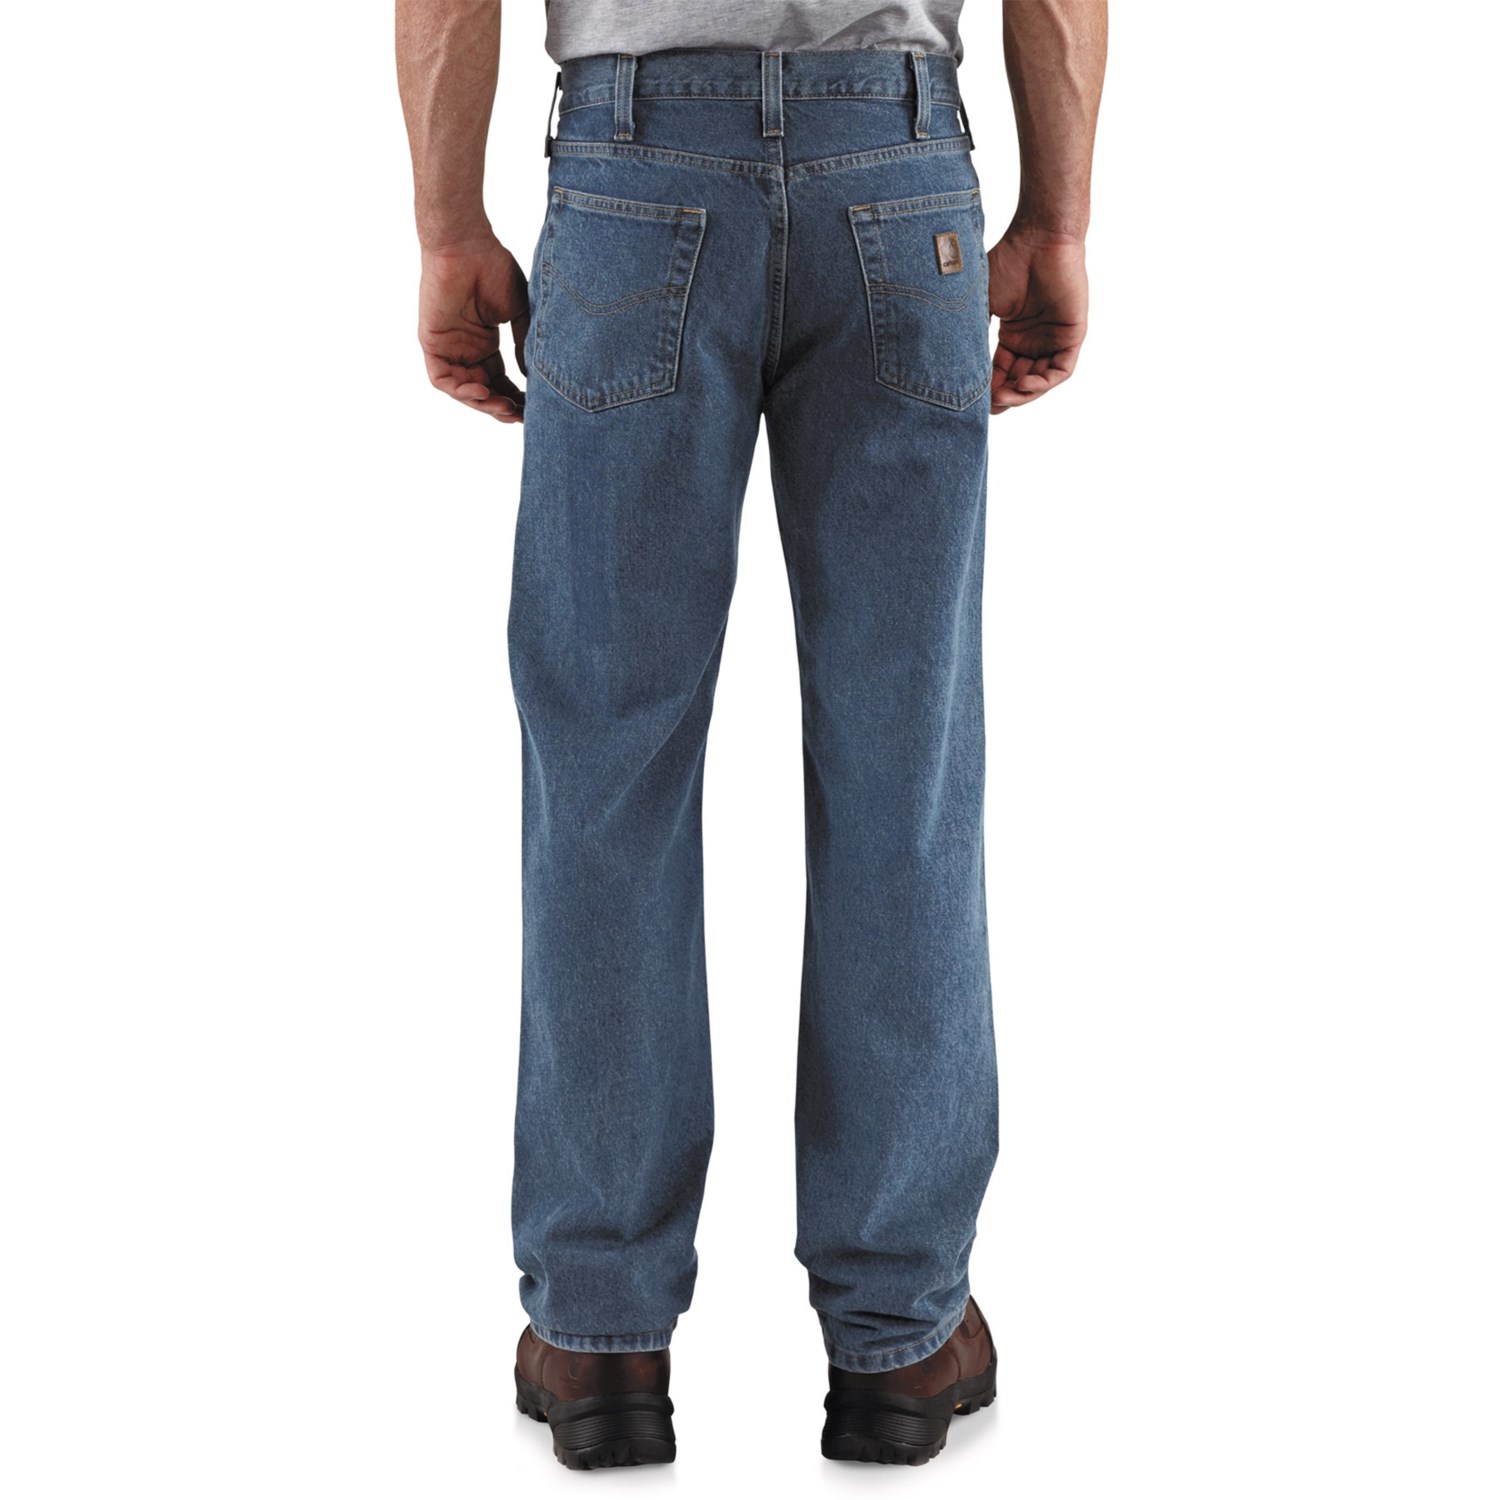 Carhartt Relaxed Fit Work Jeans (For Men)